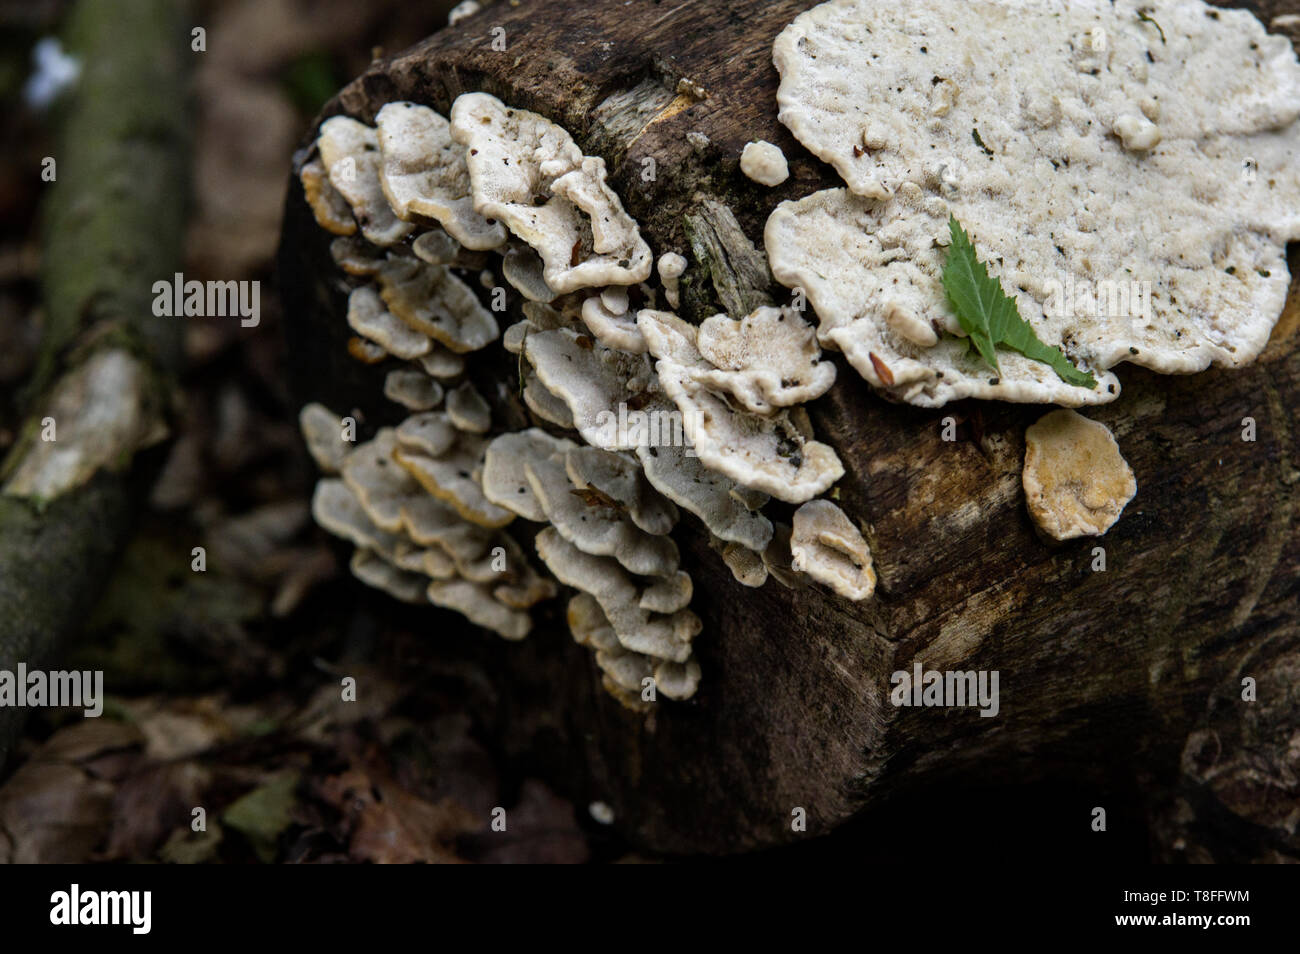 stereum hirsutum Hairy Curtain Crust mushrooms - Do not eat any fungi that has not been properly identified by a professional - some are DEADLY Stock Photo